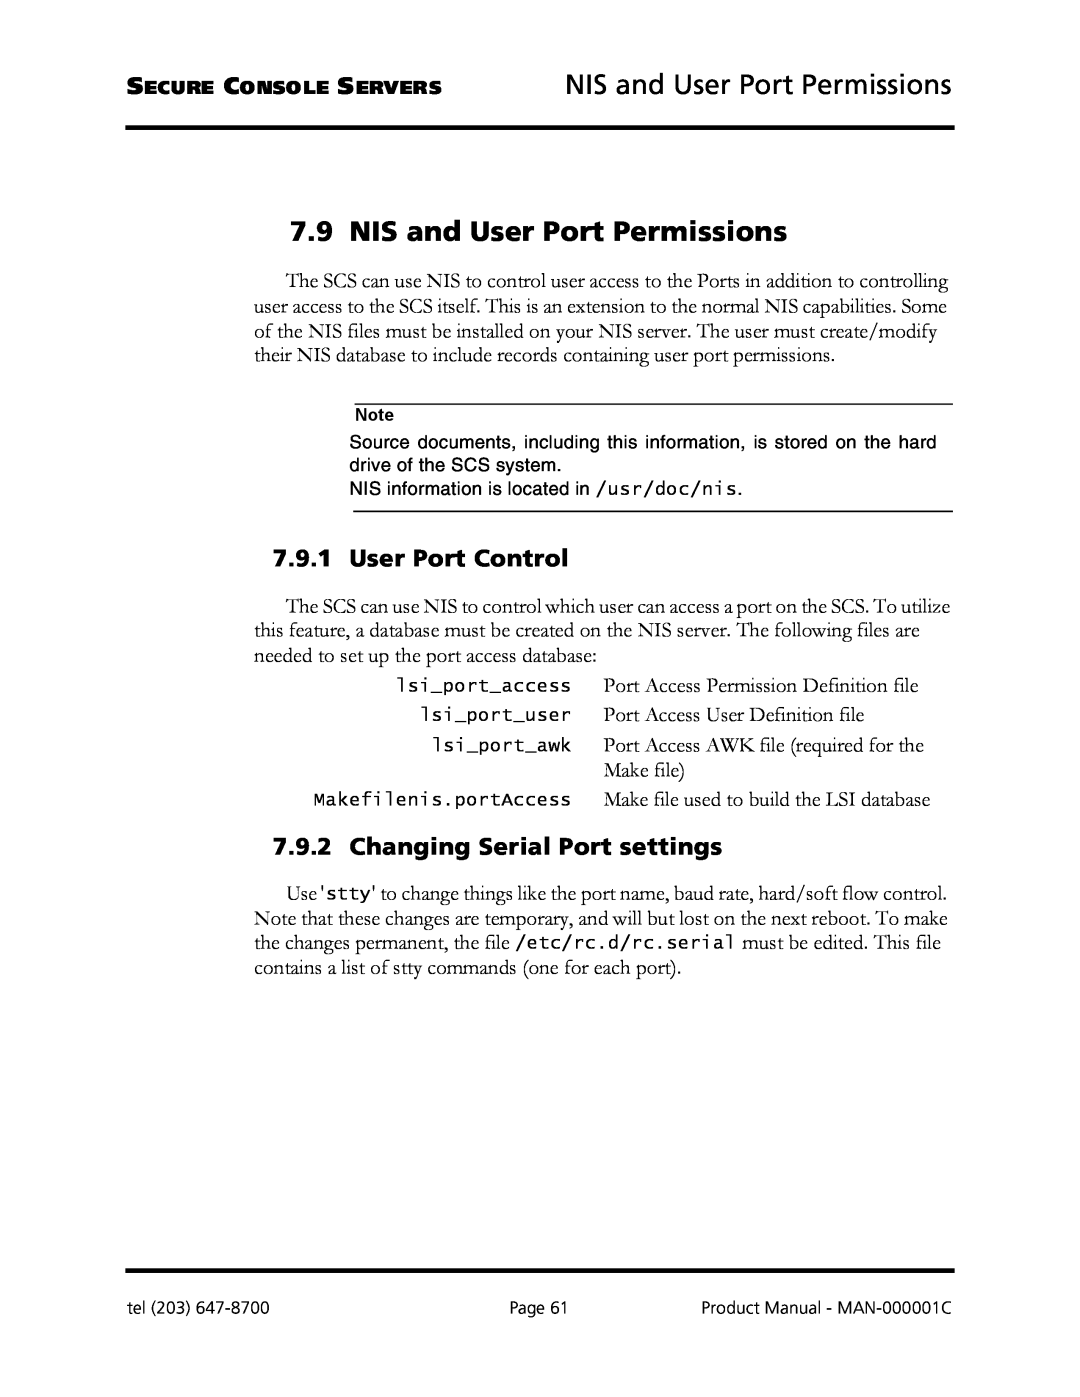 Logical Solutions SCS-R manual NIS and User Port Permissions, User Port Control, Changing Serial Port settings 